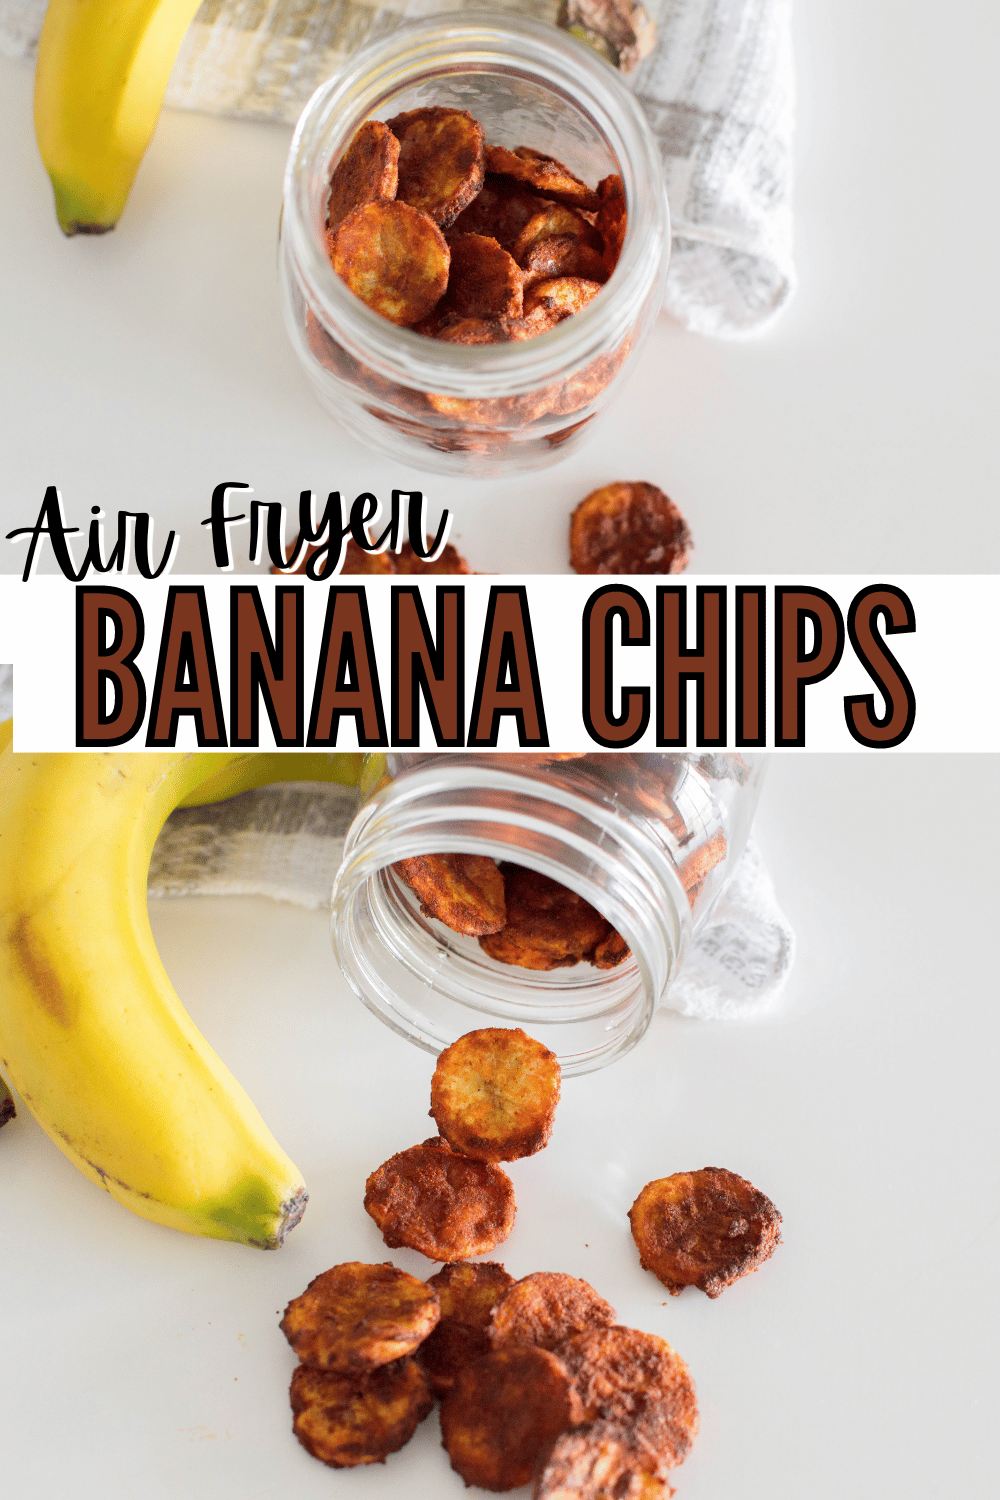 These Air Fryer Banana Chips are the perfect snack! They're crispy on the outside, soft on the inside, and made with a few simple ingredients! #airfryerbananachips #airfryer #bananachips #snackrecipe via @wondermomwannab